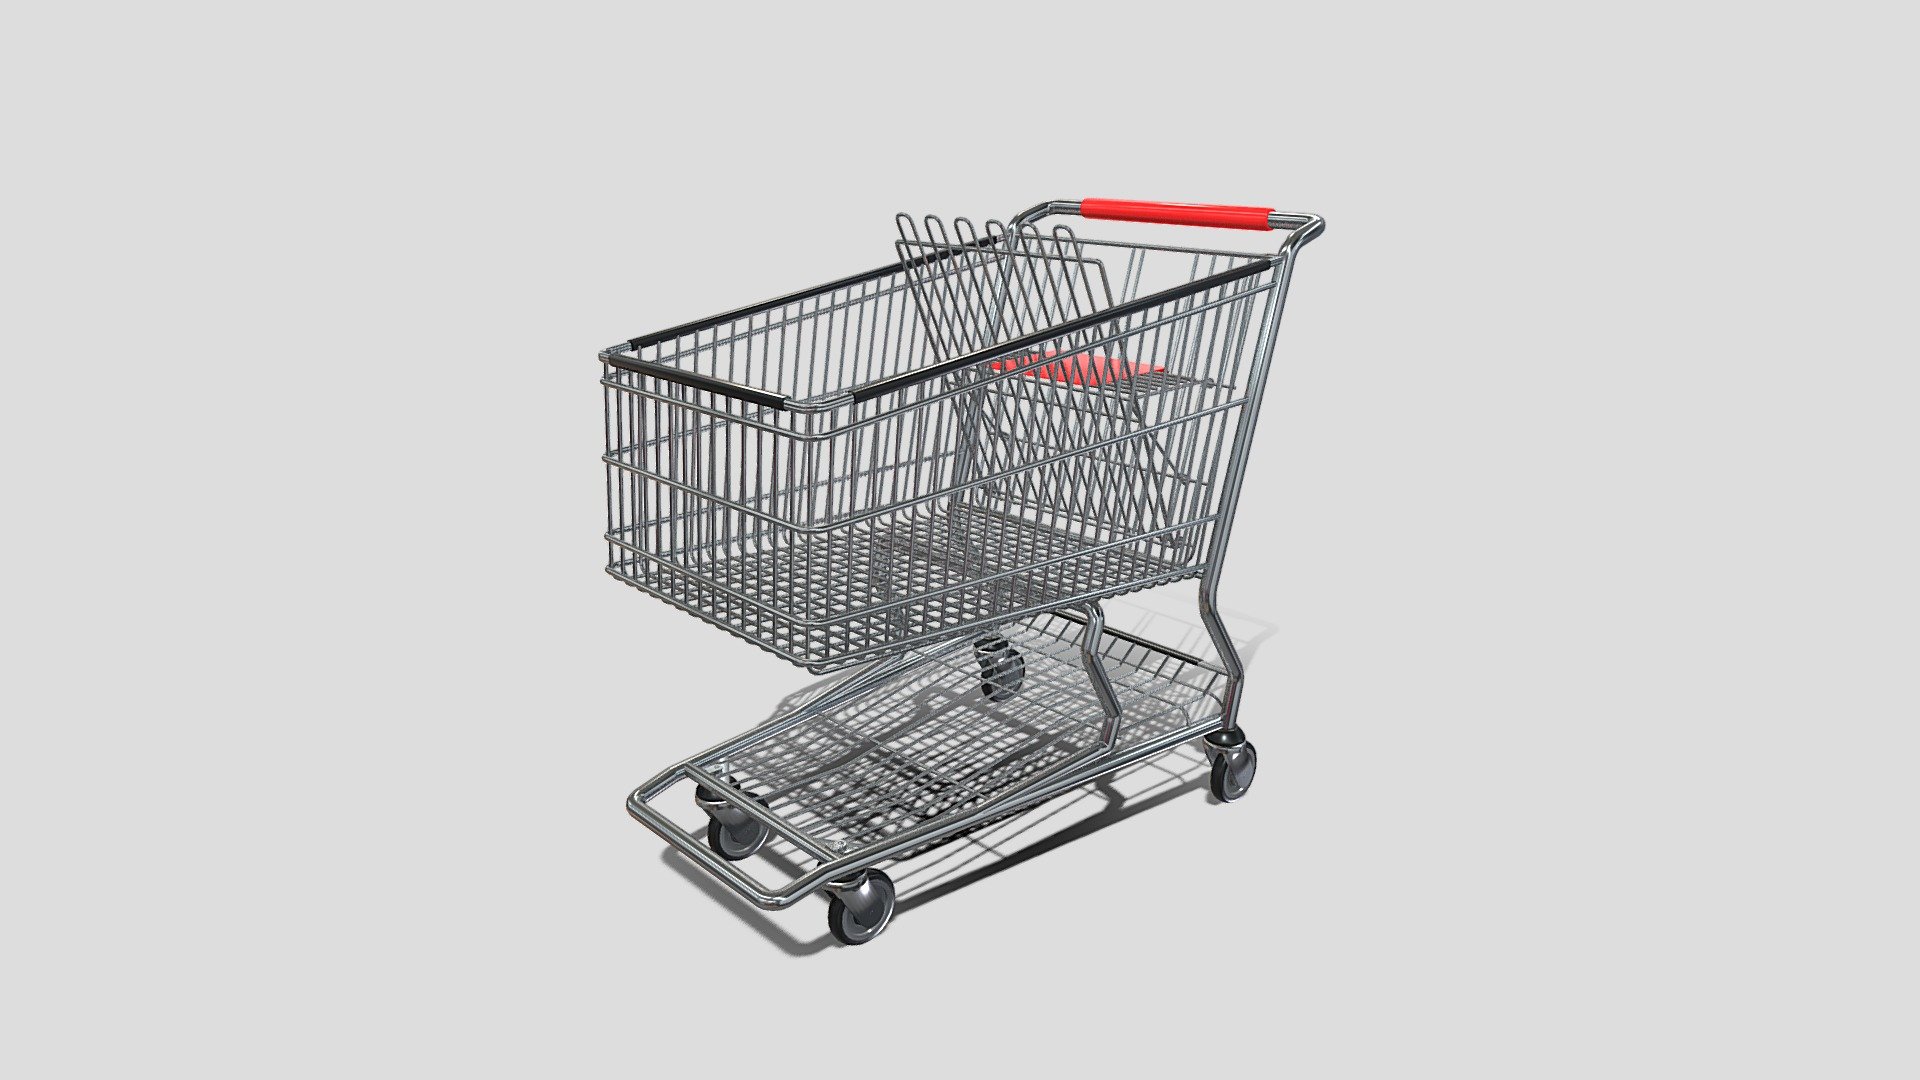 Shopping cart 3d model rendered with Cycles in Blender, as per seen on attached images. 
The model is scaled to real-life scale.

File formats:
-.blend, rendered with cycles, as seen in the images;
-.obj, with materials applied;
-.dae, with materials applied;
-.fbx, with materials applied;
-.stl;

3D Software:
The 3D model was originally created in Blender 3.1 and rendered with Cycles.

Materials and textures:
The models have materials applied in all formats, and are ready to import and render.
Materials are image based using PBR, the model comes with five 4k png image textures.

Preview scenes:
The preview images are rendered in Blender using its built-in render engine &lsquo;Cycles'.
Note that the blend files come directly with the rendering scene included and the render command will generate the exact result as seen in previews.
Scene elements are on a different layer from the actual model for easier manipulation of objects.

For any problems please feel free to contact me.

Don't forget to rate and enjoy! - Shopping cart v6 - Buy Royalty Free 3D model by dragosburian 3d model